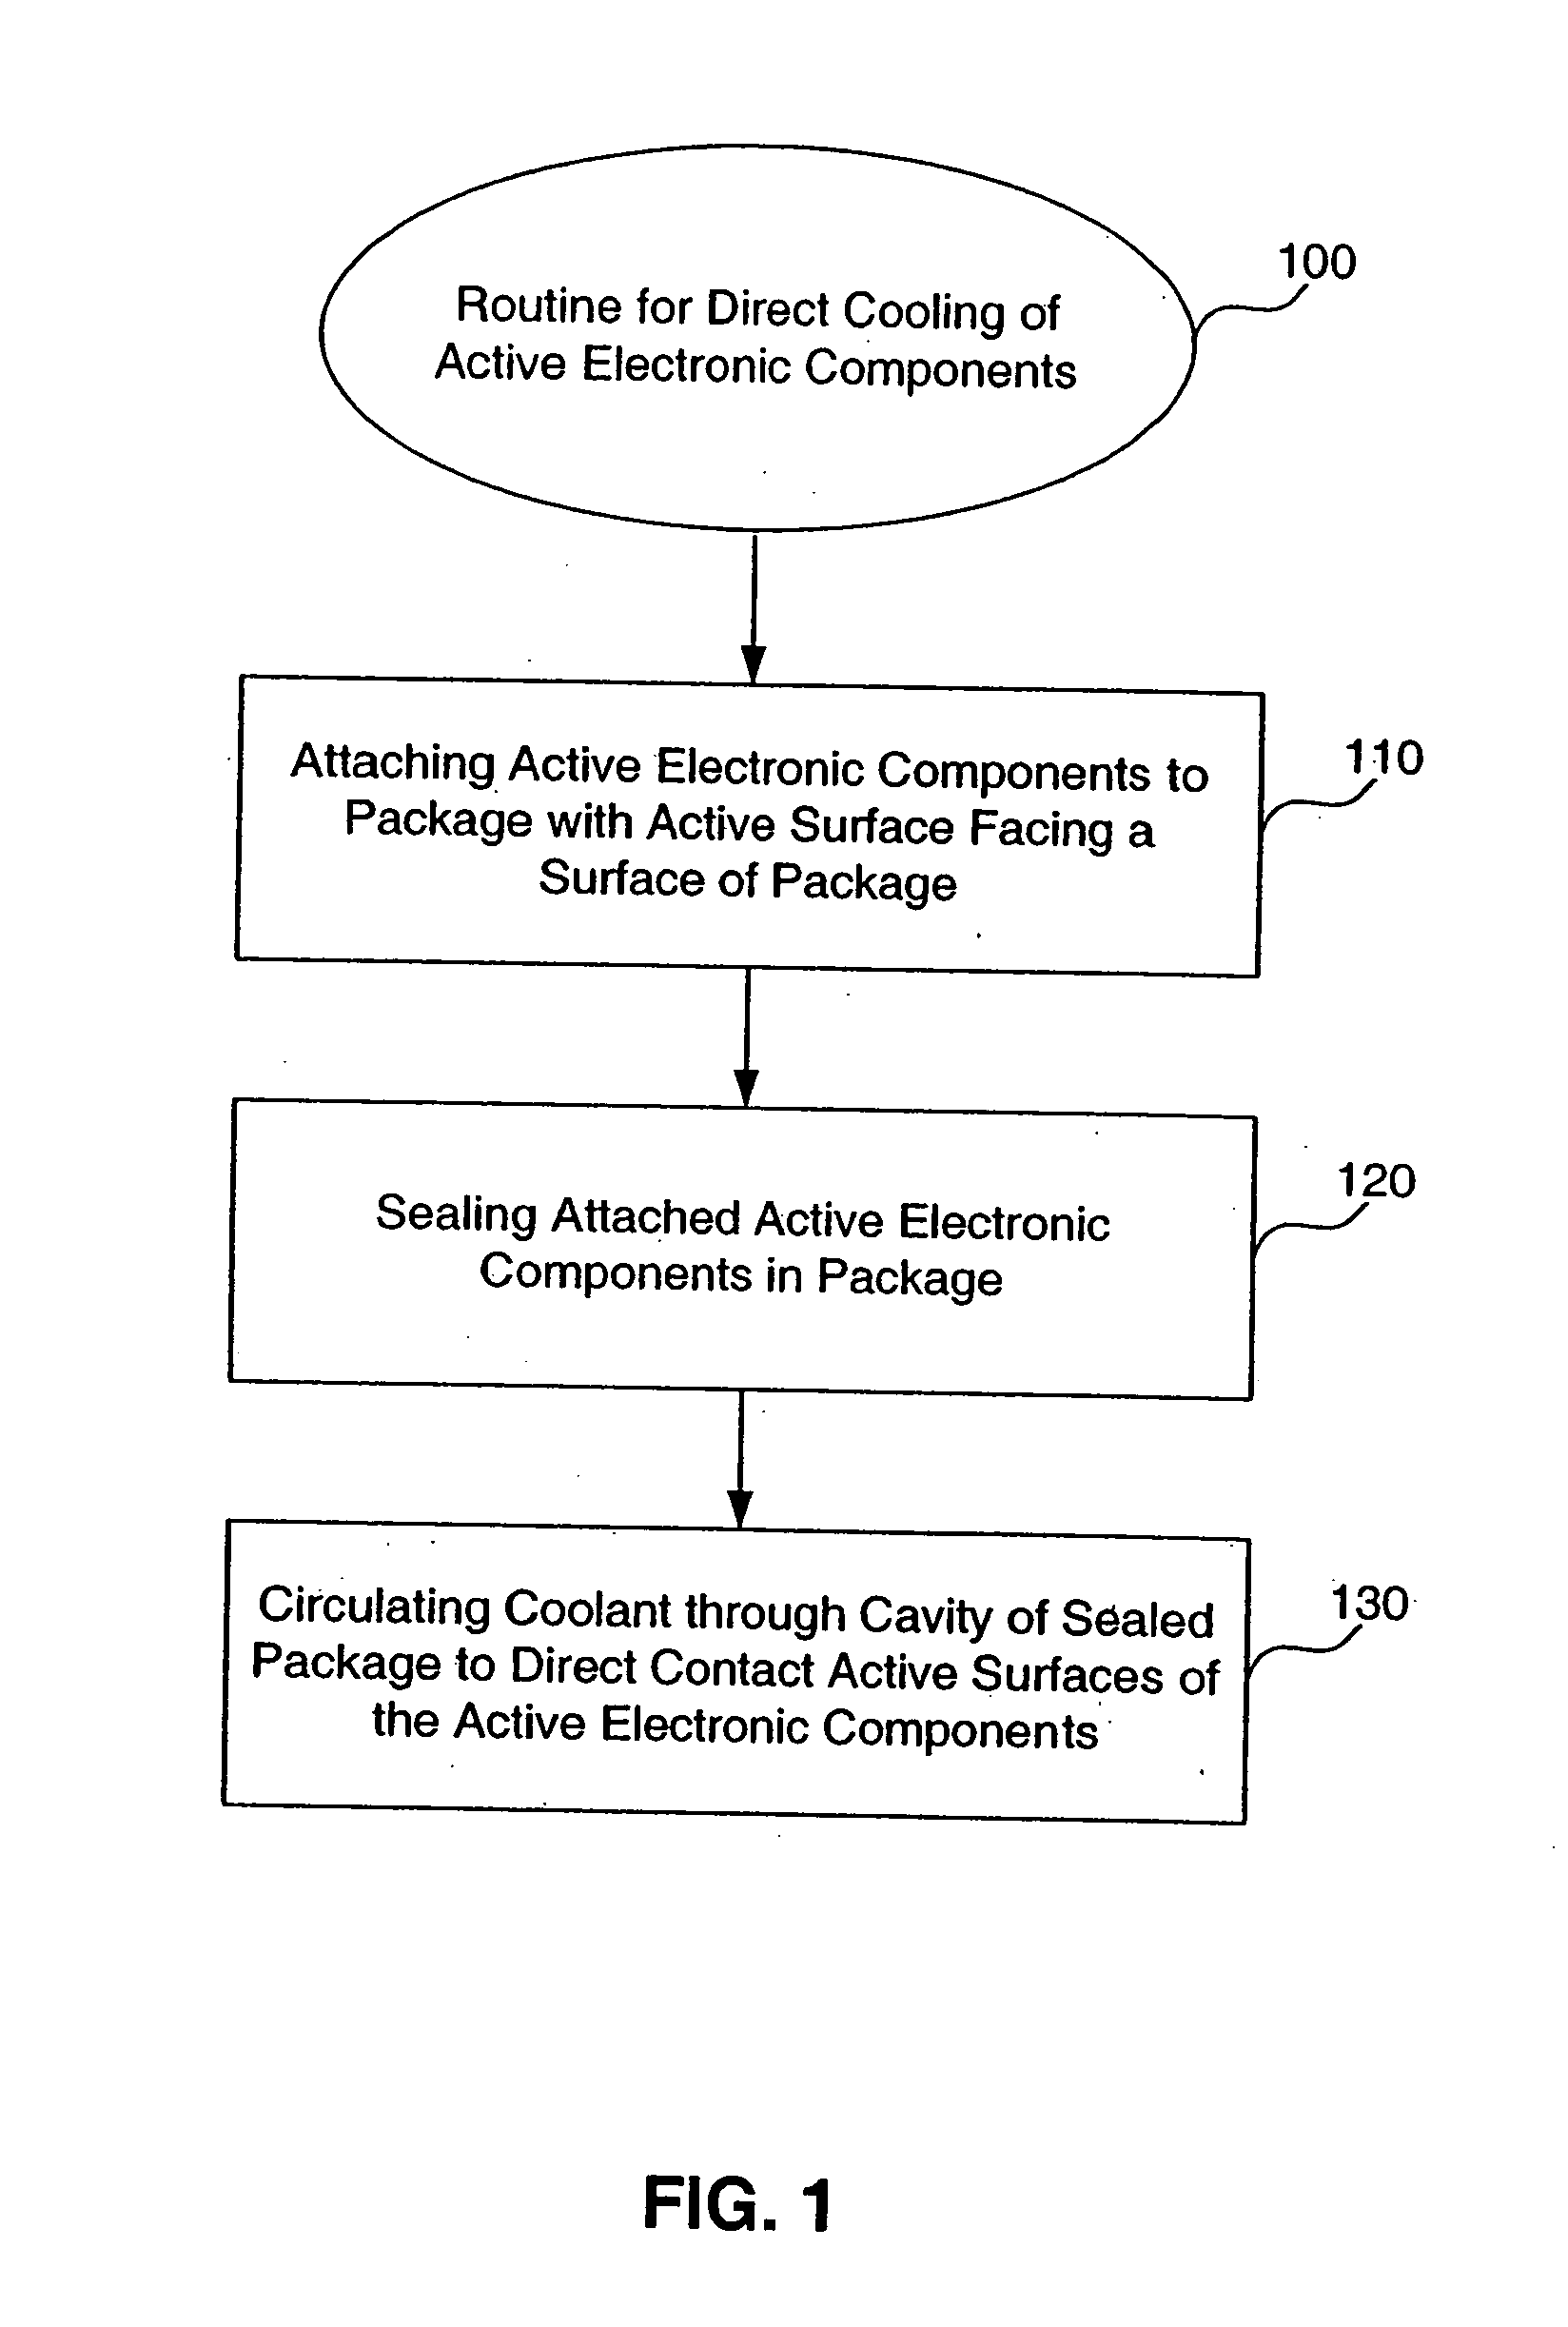 Electronic package with direct cooling of active electronic components